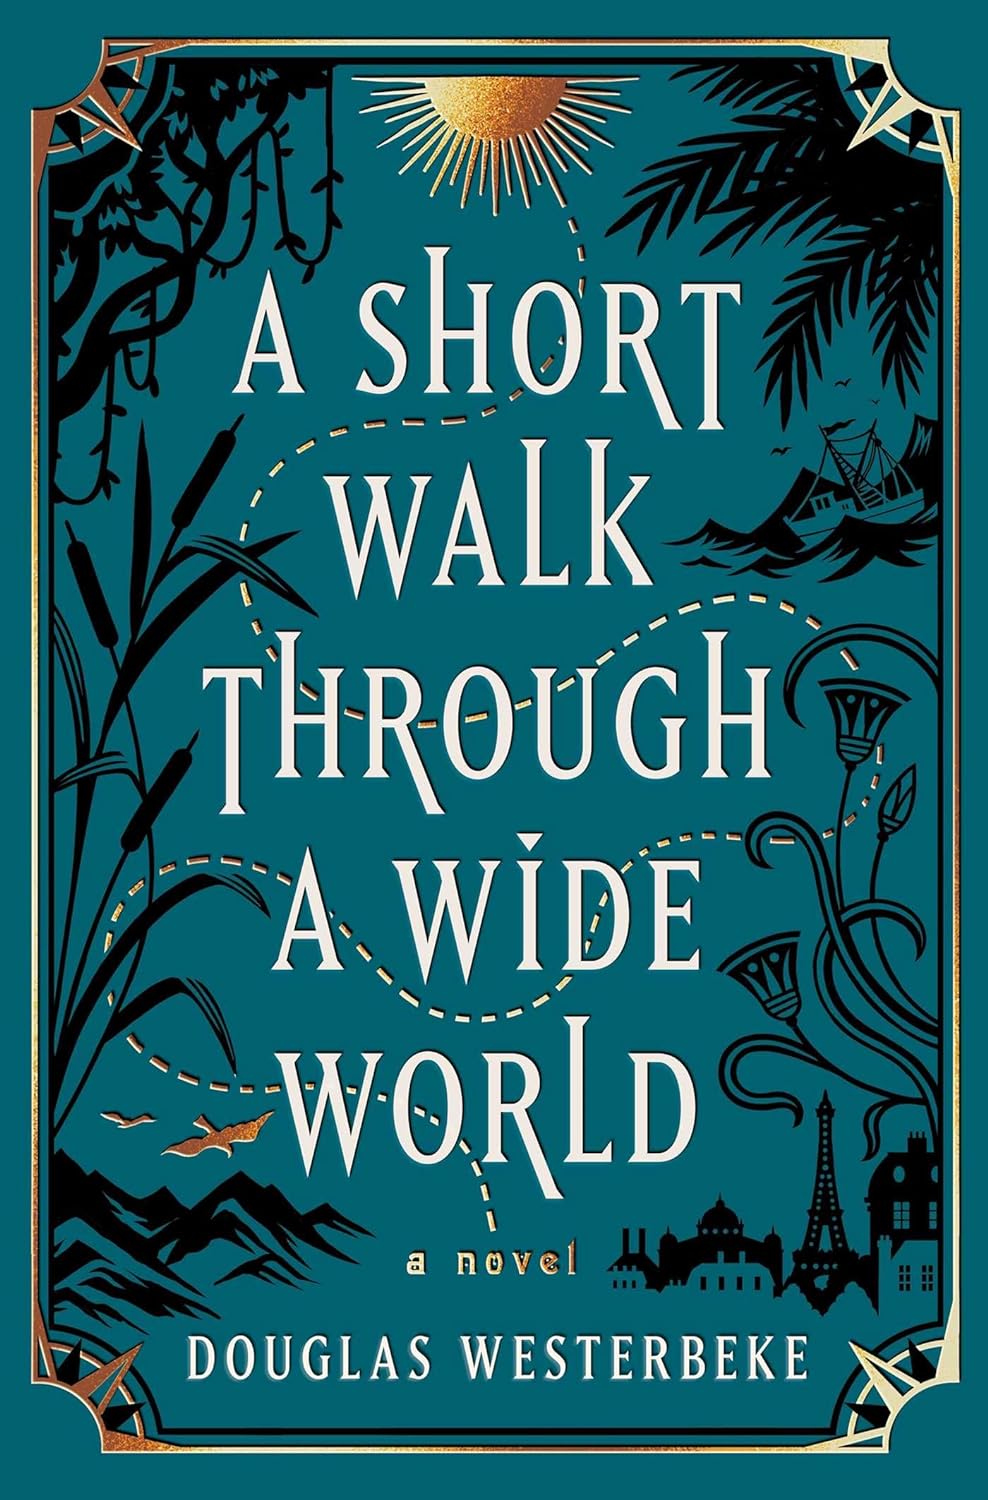 Image for "A Short Walk Through a Wide World"